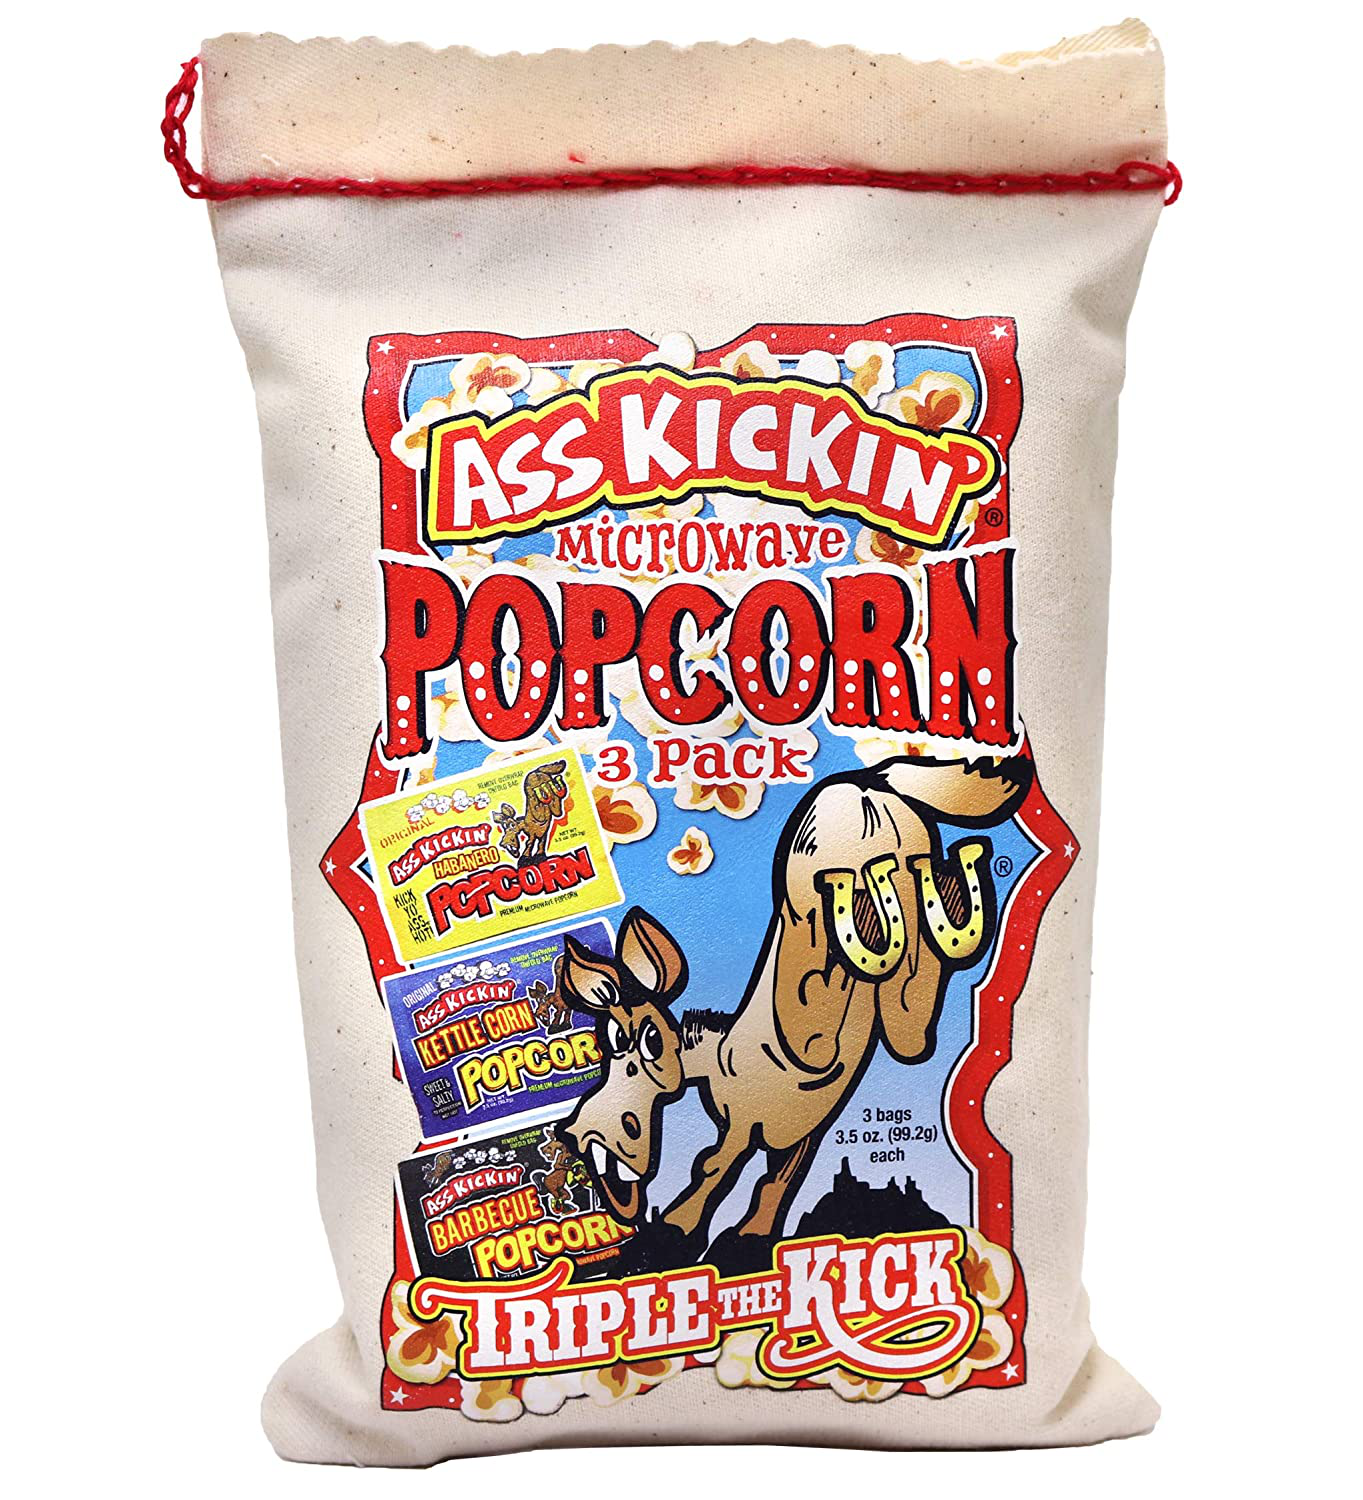 ASS KICKIN’ Premium Microwave Popcorn – Popcorn Variety Pack (3) in Canvas Bag - Ultimate Sweet and Spicy Gourmet Gift - Makes a Great Movie Theater Popcorn or Snack Food for Movie Night